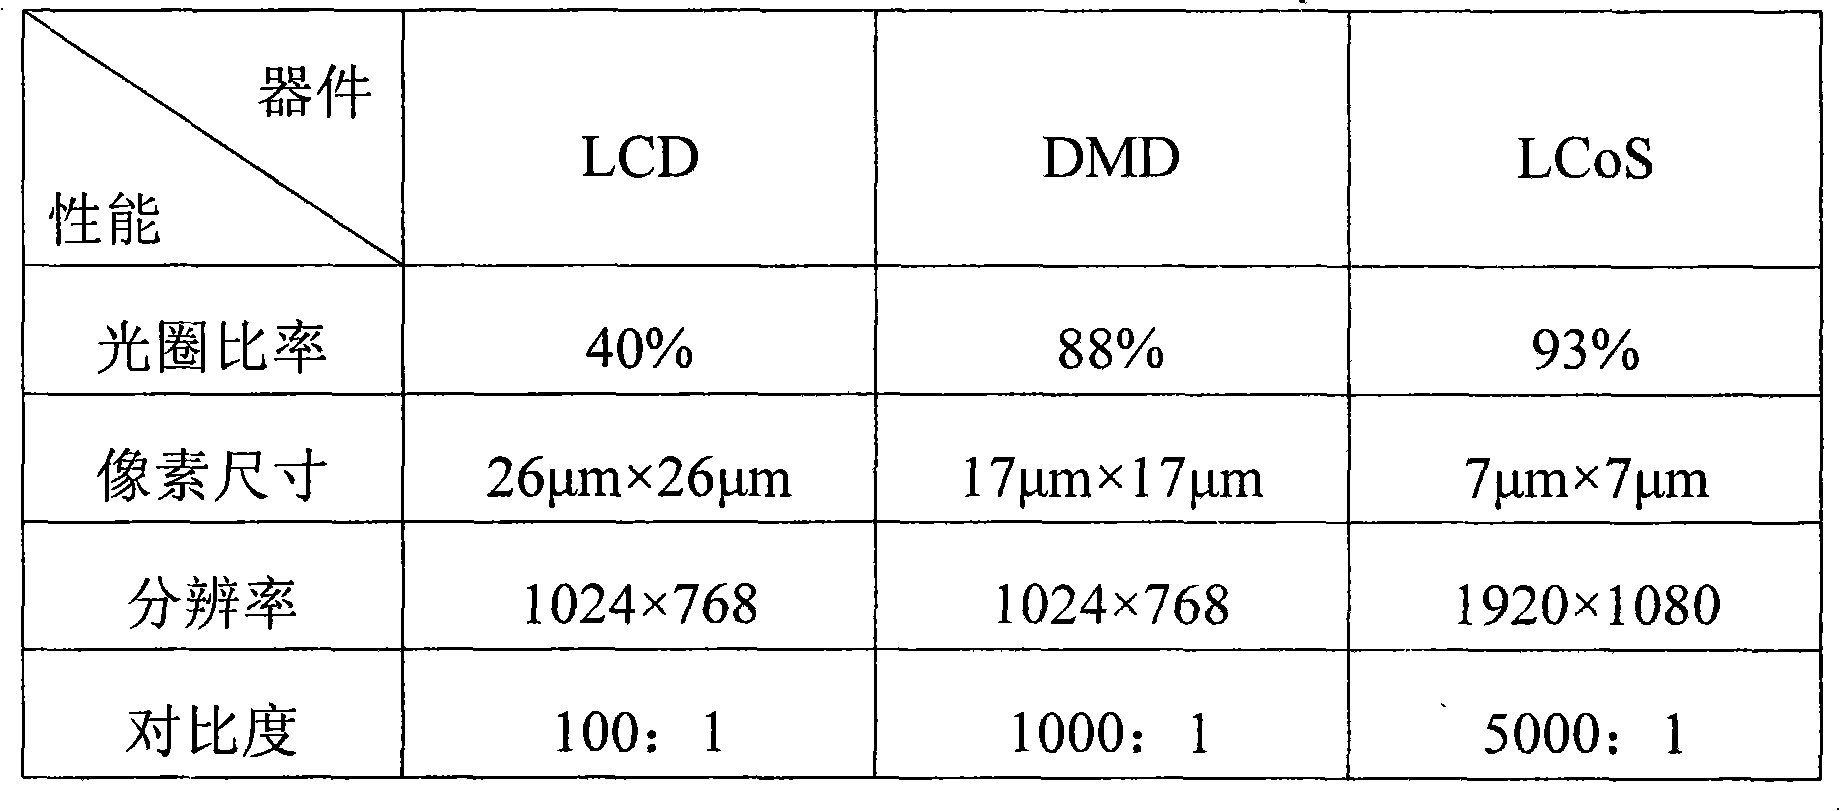 Light-cured quick forming device and method based on reflection-type liquid crystal light valve